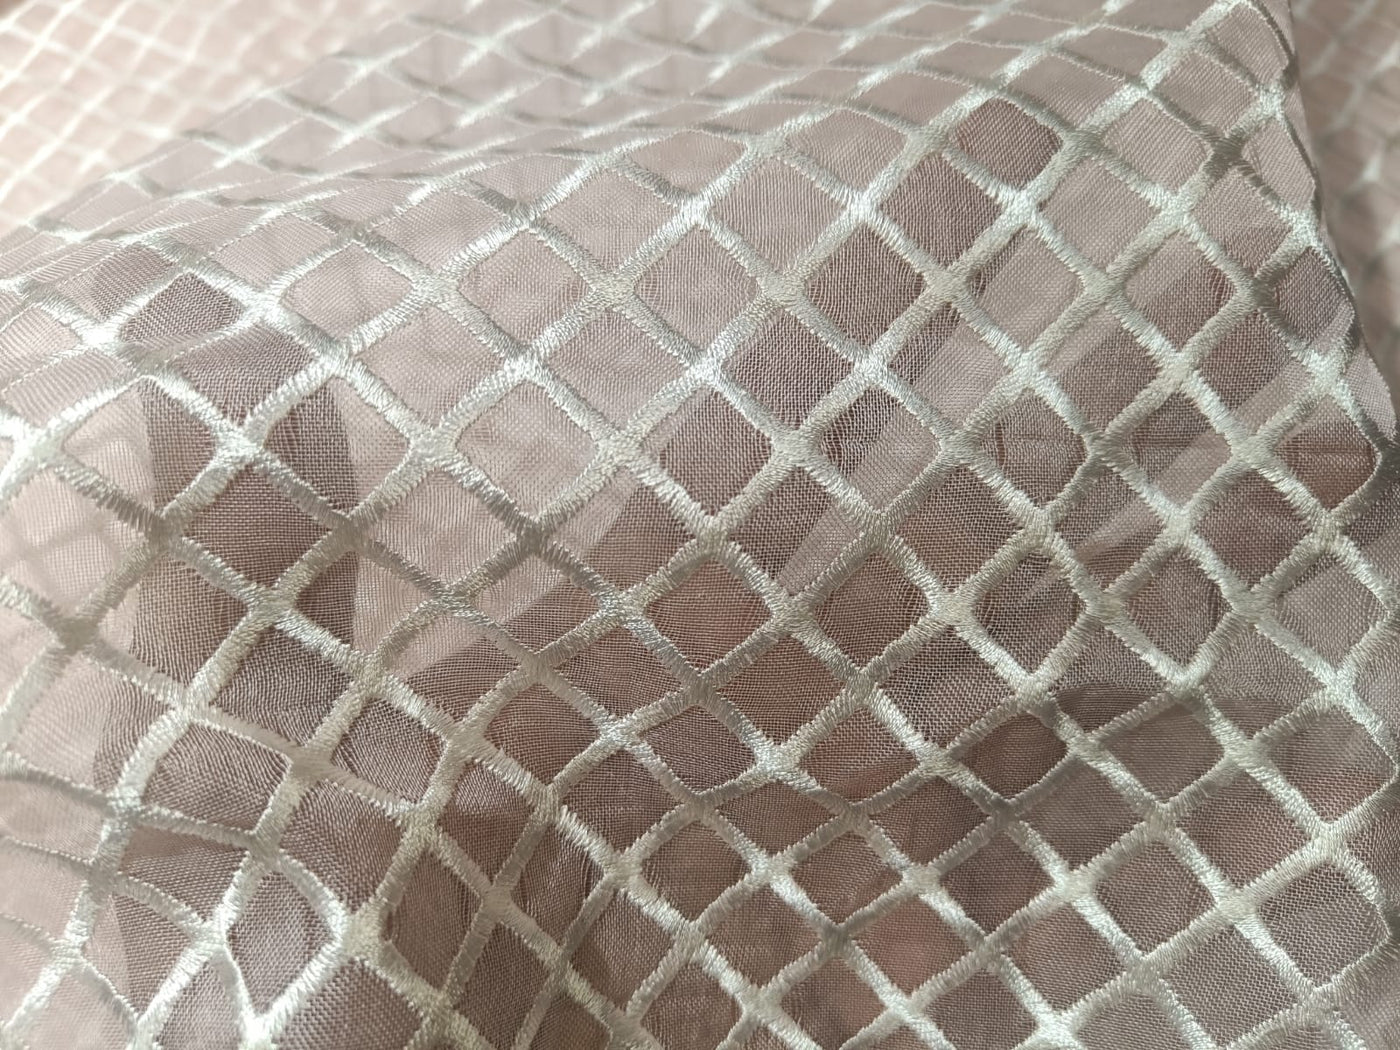 100 % Silk Organza Embroidery Plaid Semi Sheer Fabric 44" wide available in three colors[12306]